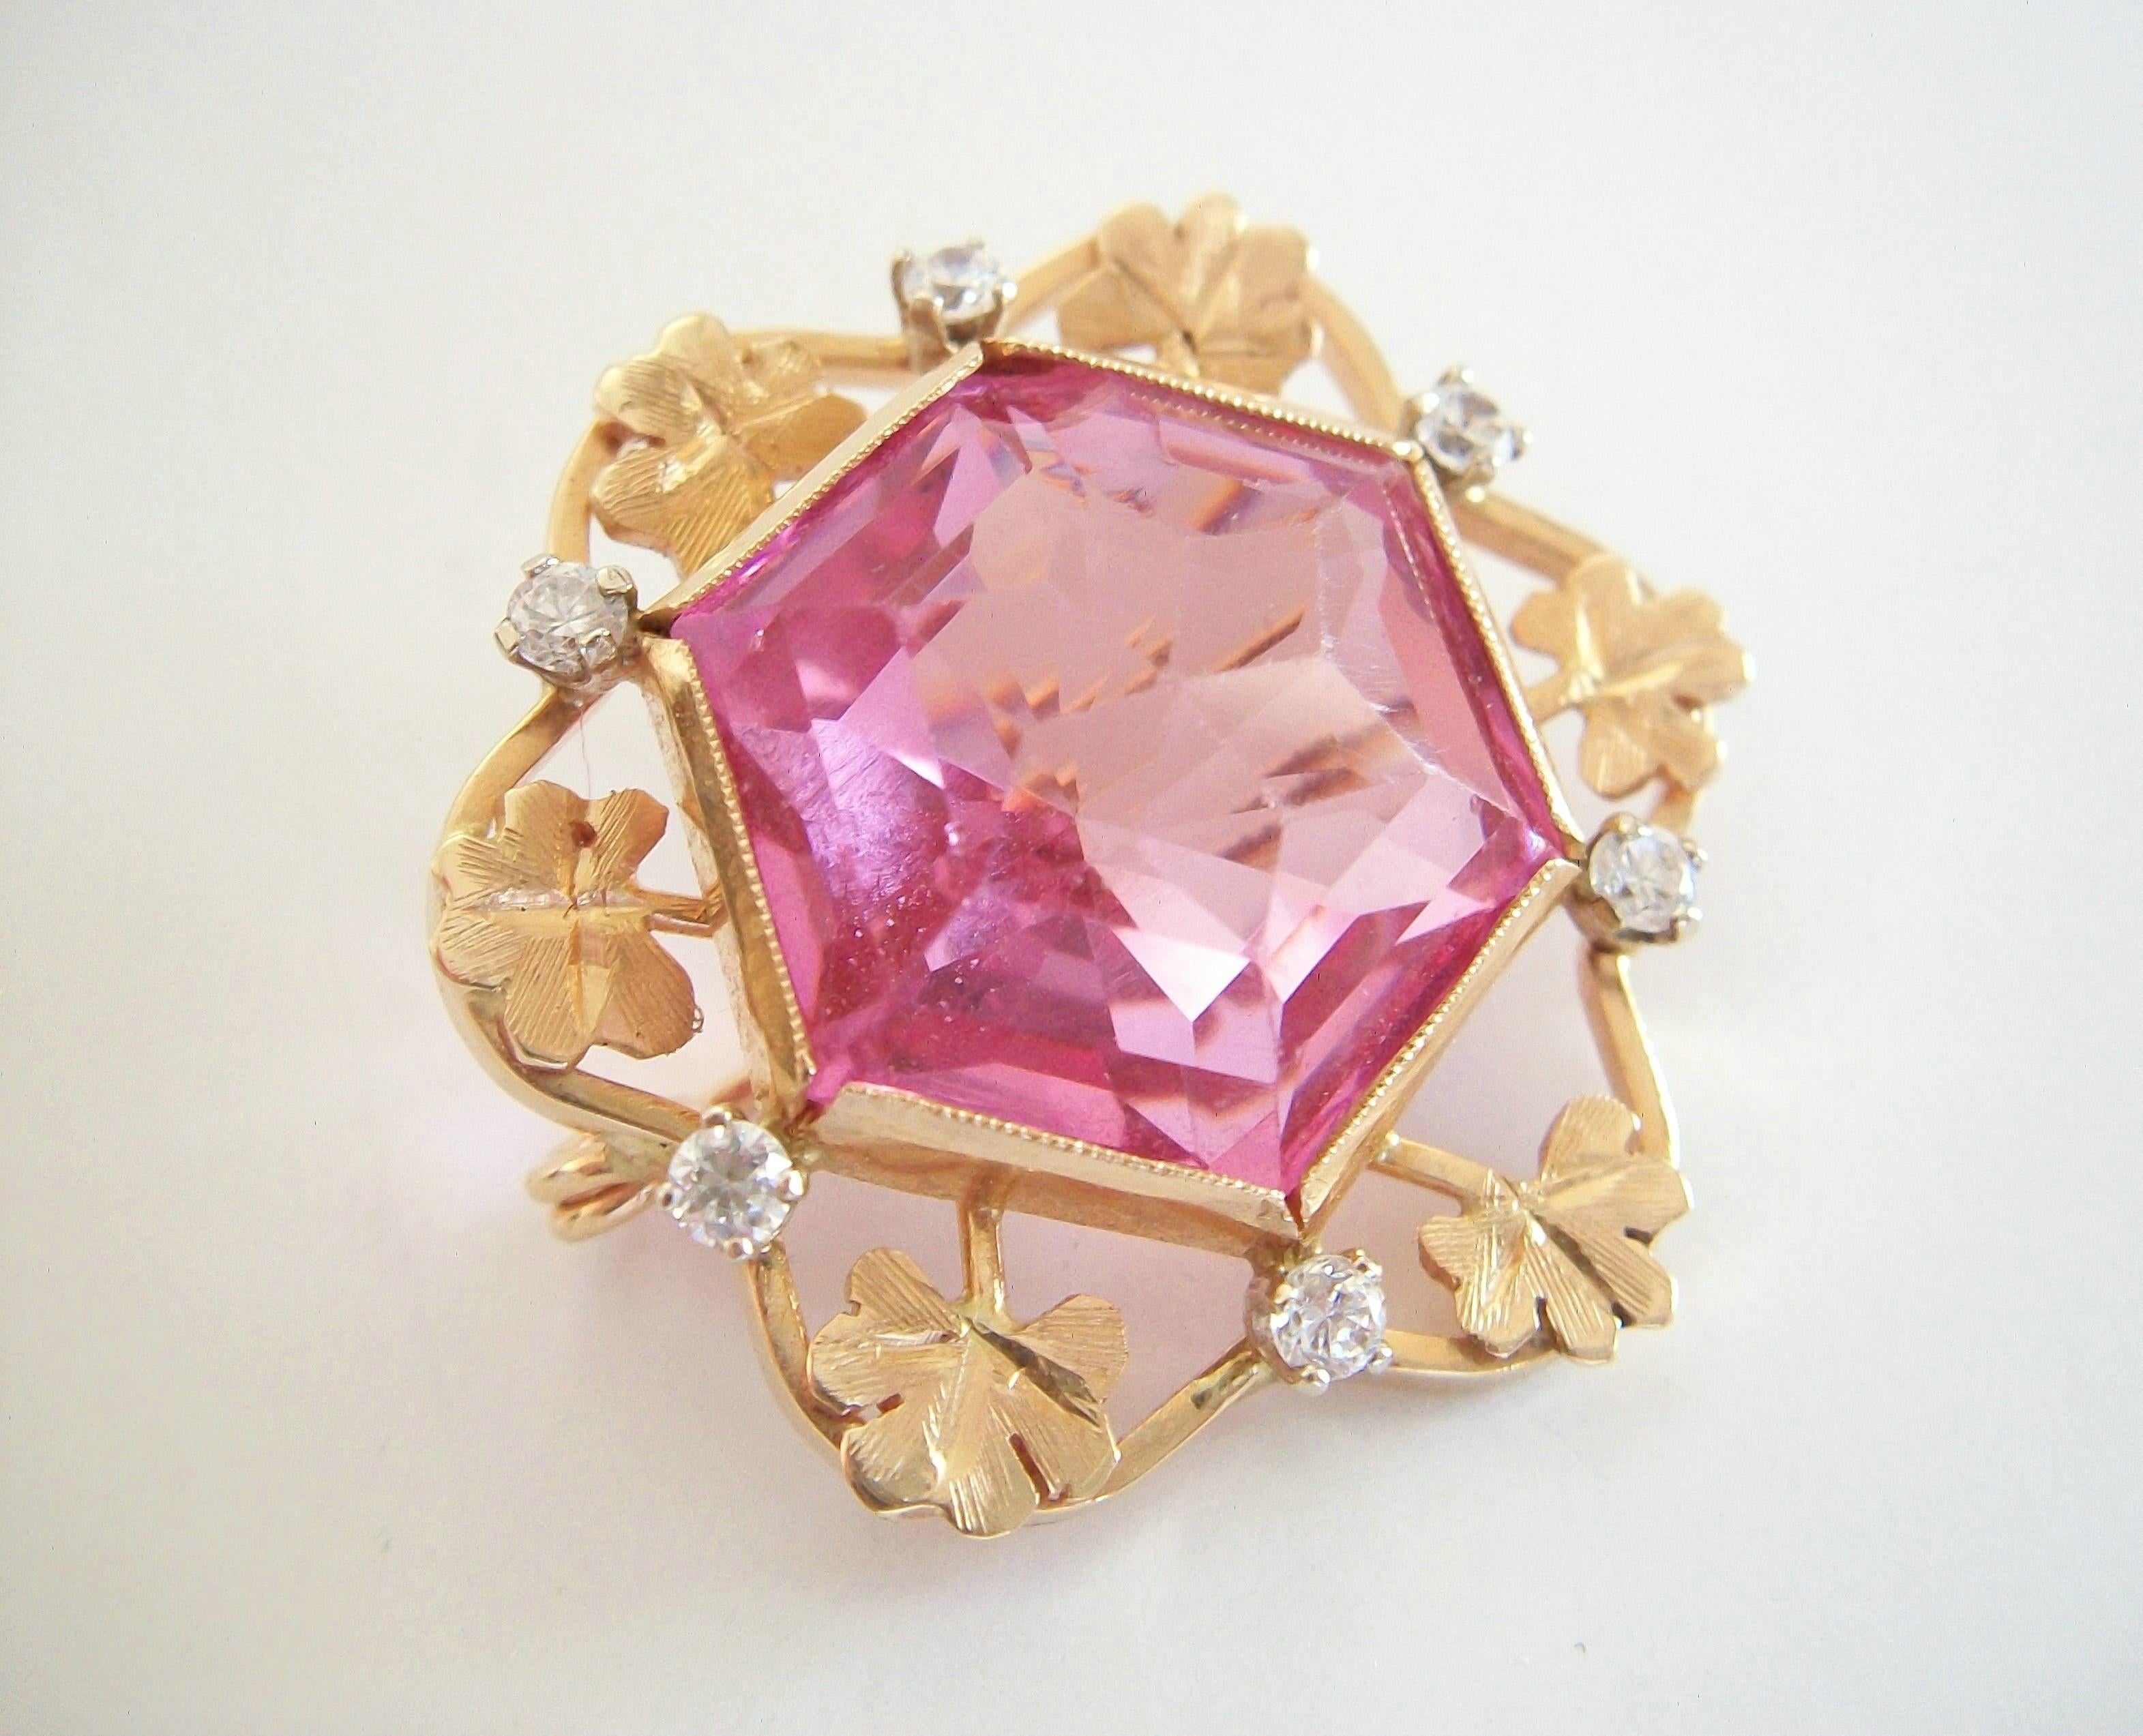 Retro 14K yellow gold custom made brooch - set with one hexagonal cut pink crystal (approx. 24 carats - 20 mm. x 17 mm. x 13 mm. deep) - surrounded by gold chased sprigs of clover and six claw set clear crystals (approx. 1/3 carat total - 2 mm.